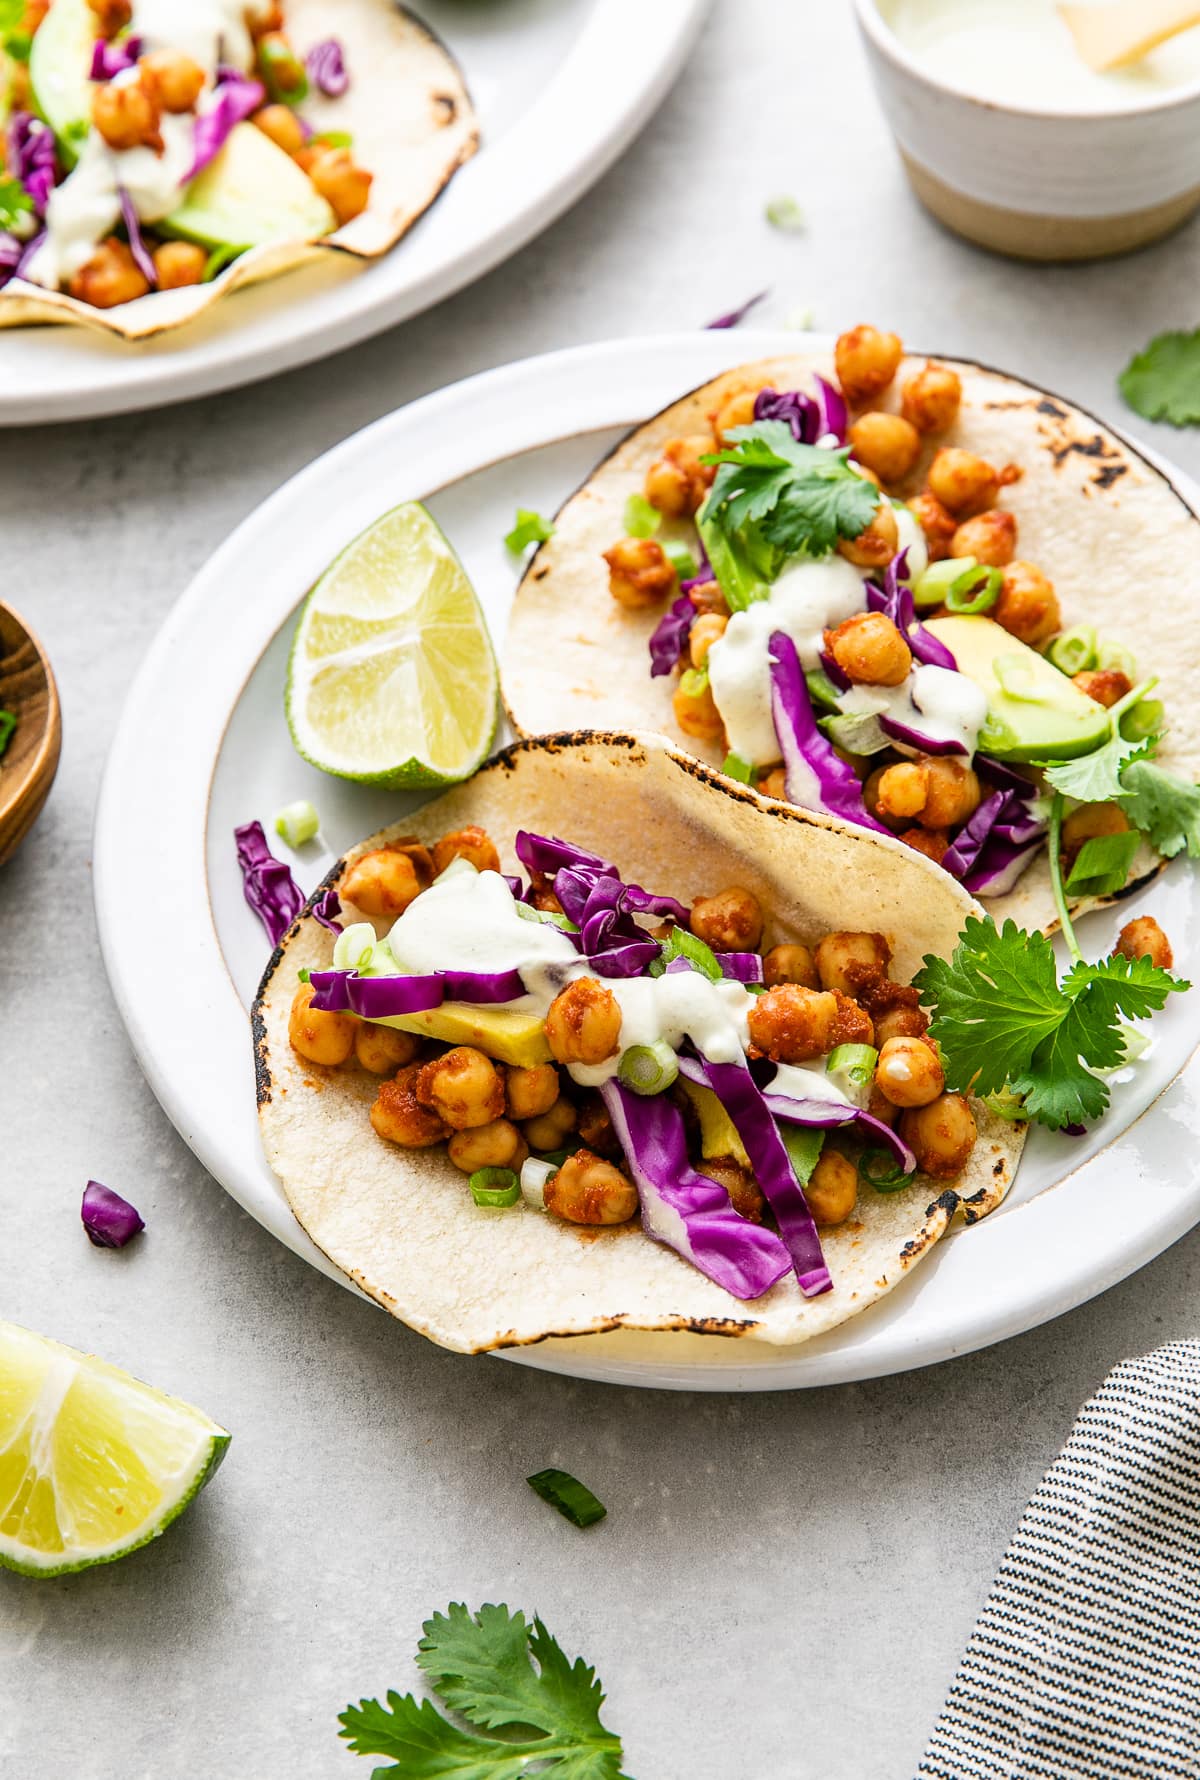 side angle view of plate with chickpea tacos and items surrounding.